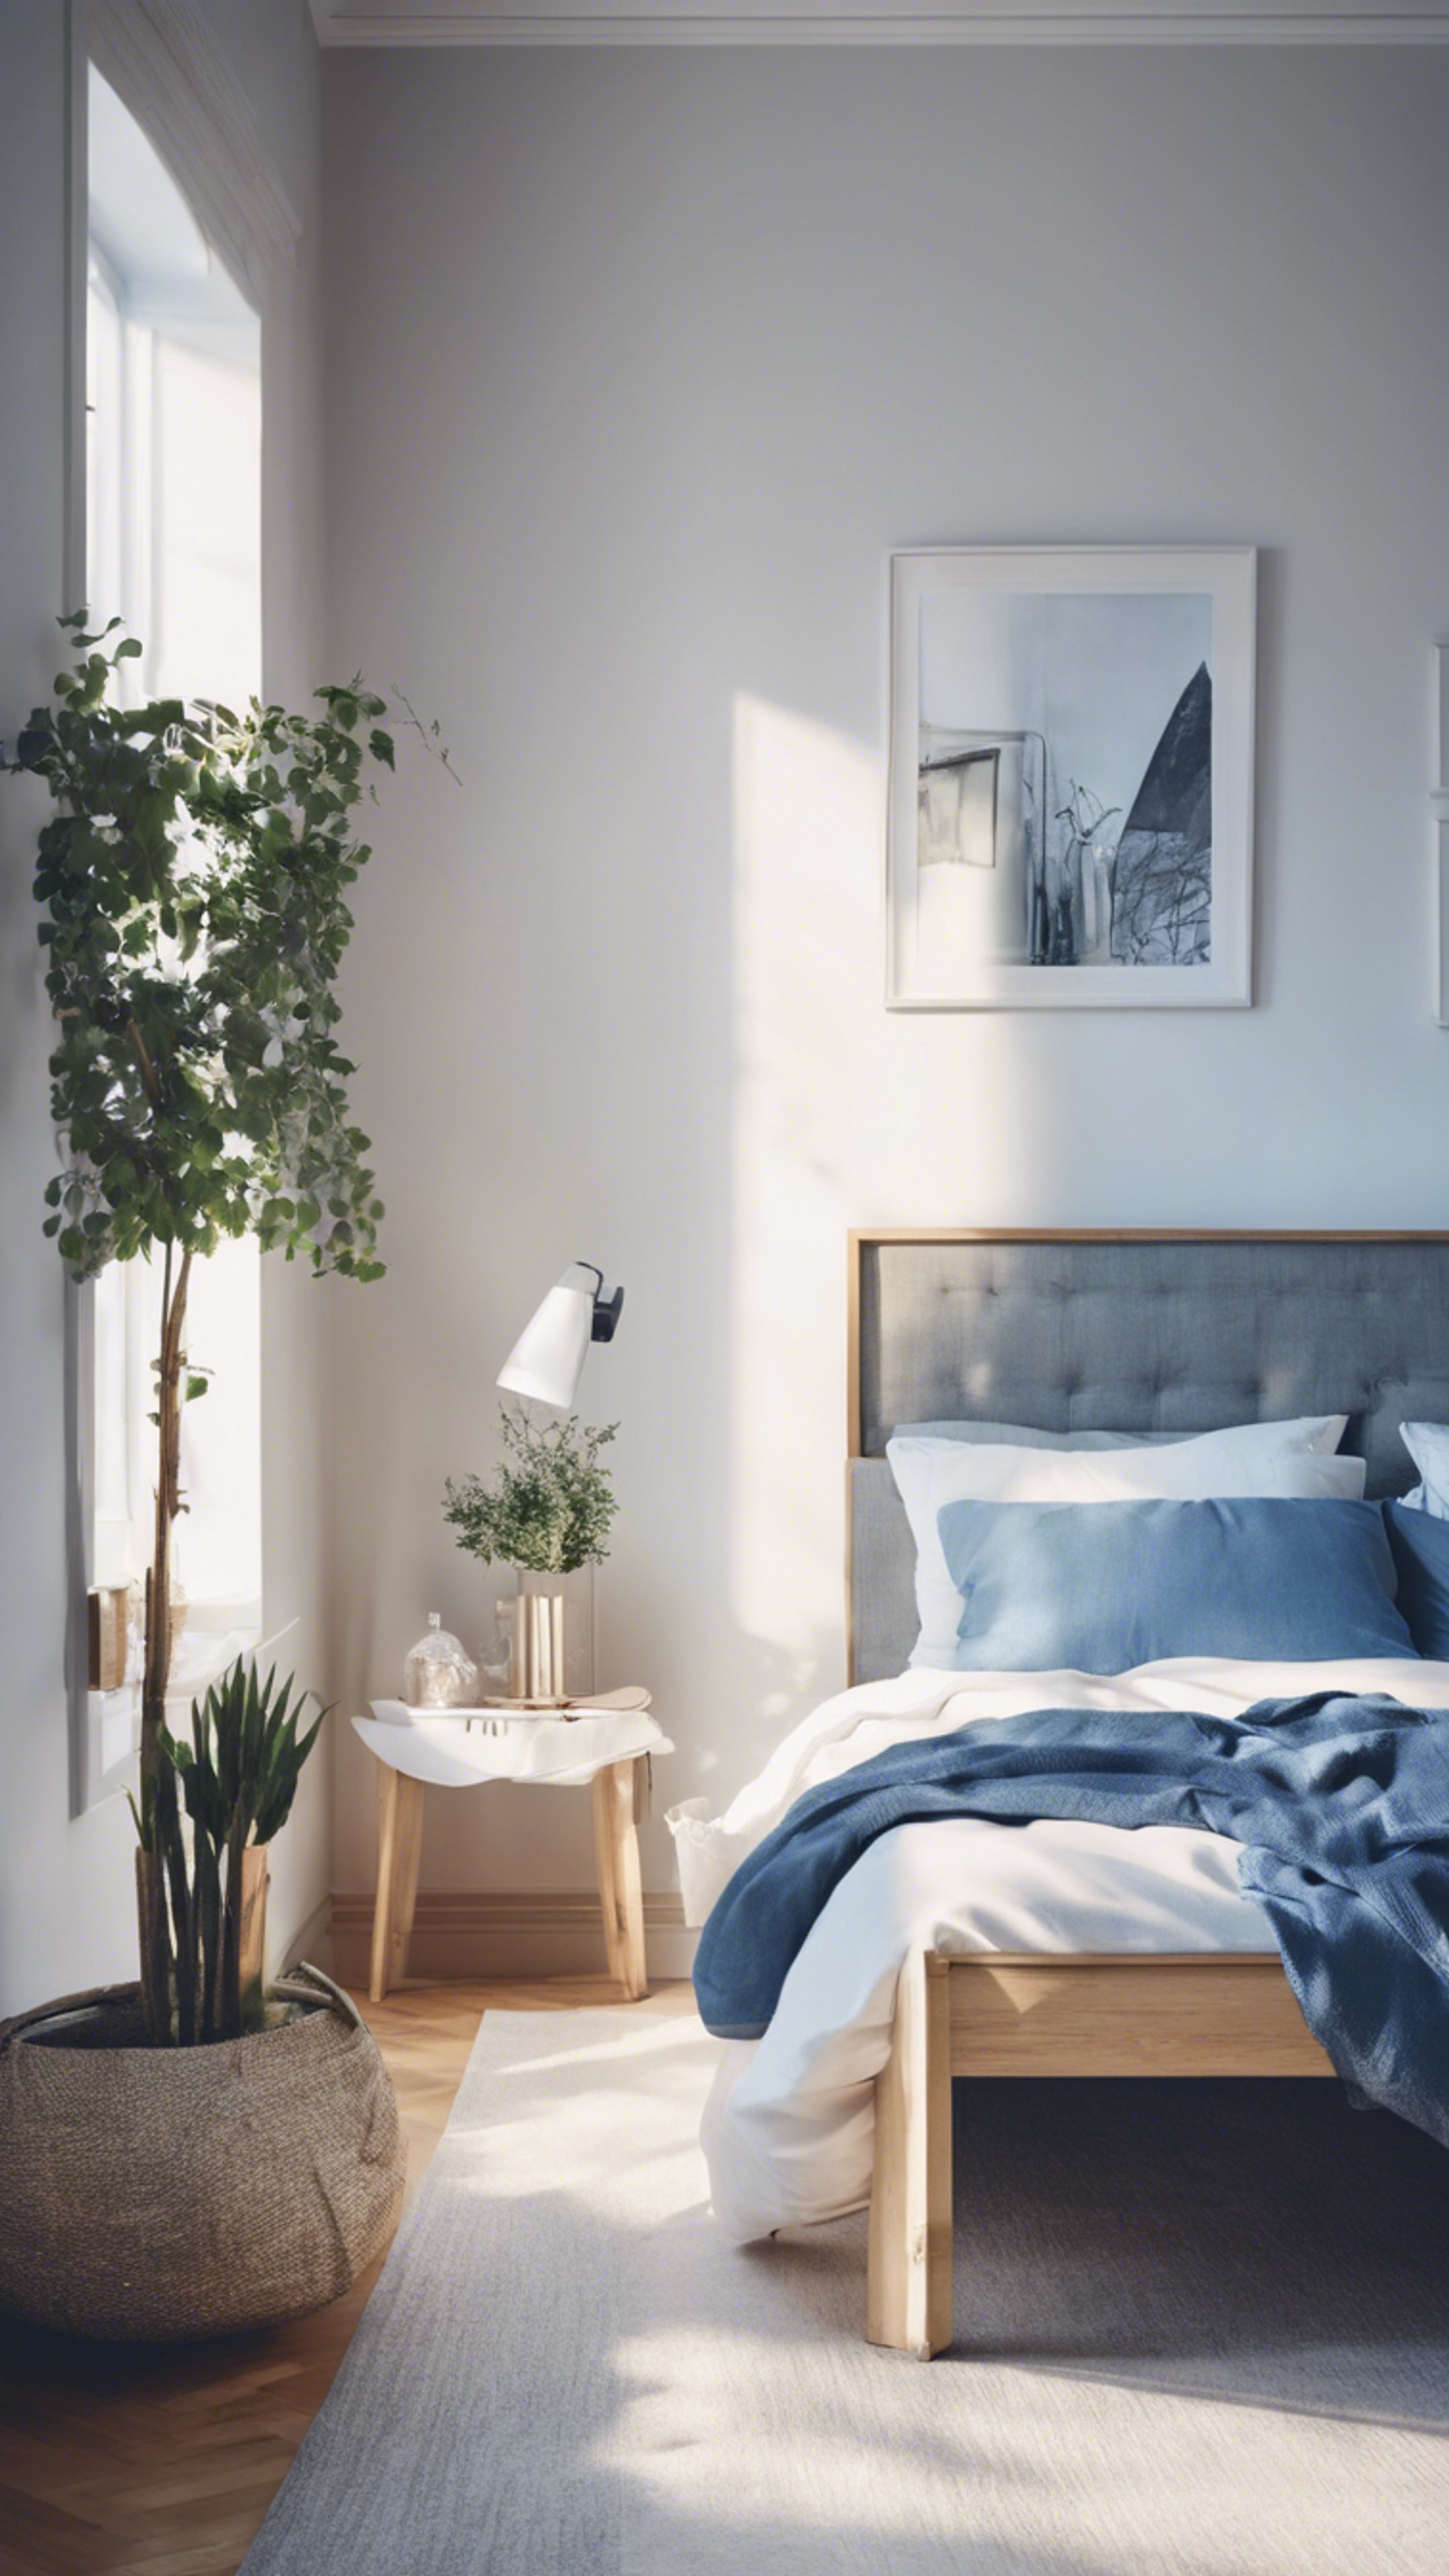 A Scandinavian style bedroom with white and blue minimalist decor bathed in morning sunlight. 墙纸[5ddcfeaf0e5340e39bc5]